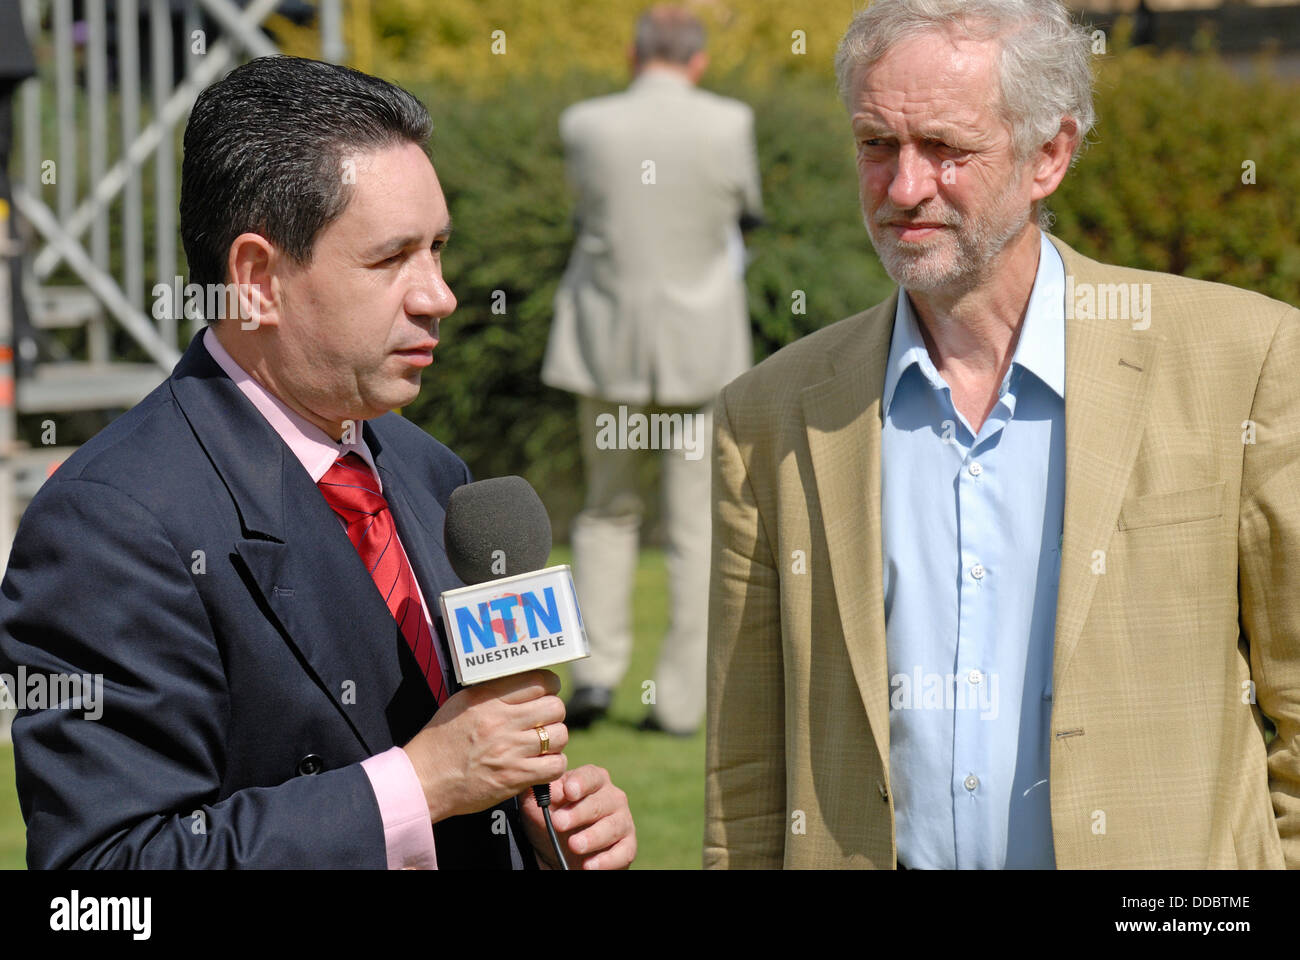 Jeremy Corbyn MP (Labour) being interviewed by Leo Pareja for Spanish television (NTN - Nuestra Tele Noticias) on College Green Stock Photo